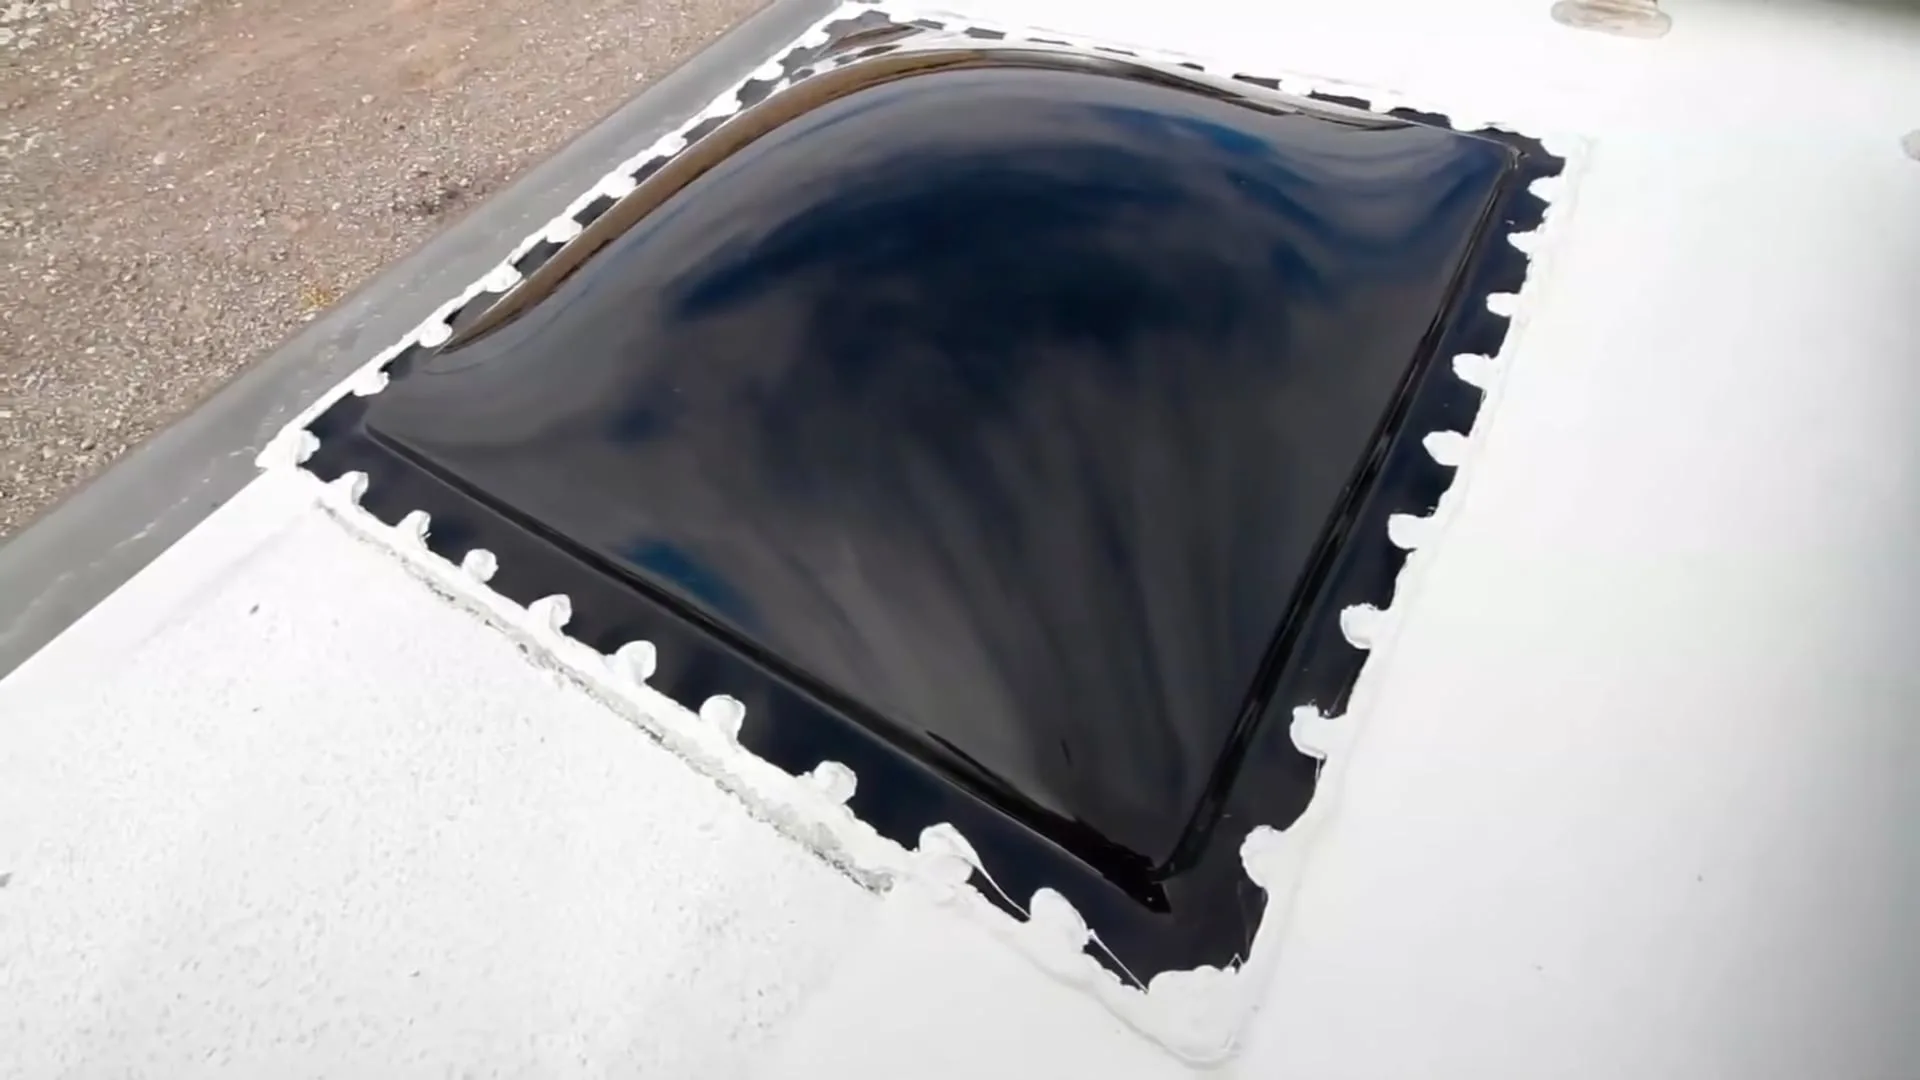 RV skylight replacement completed